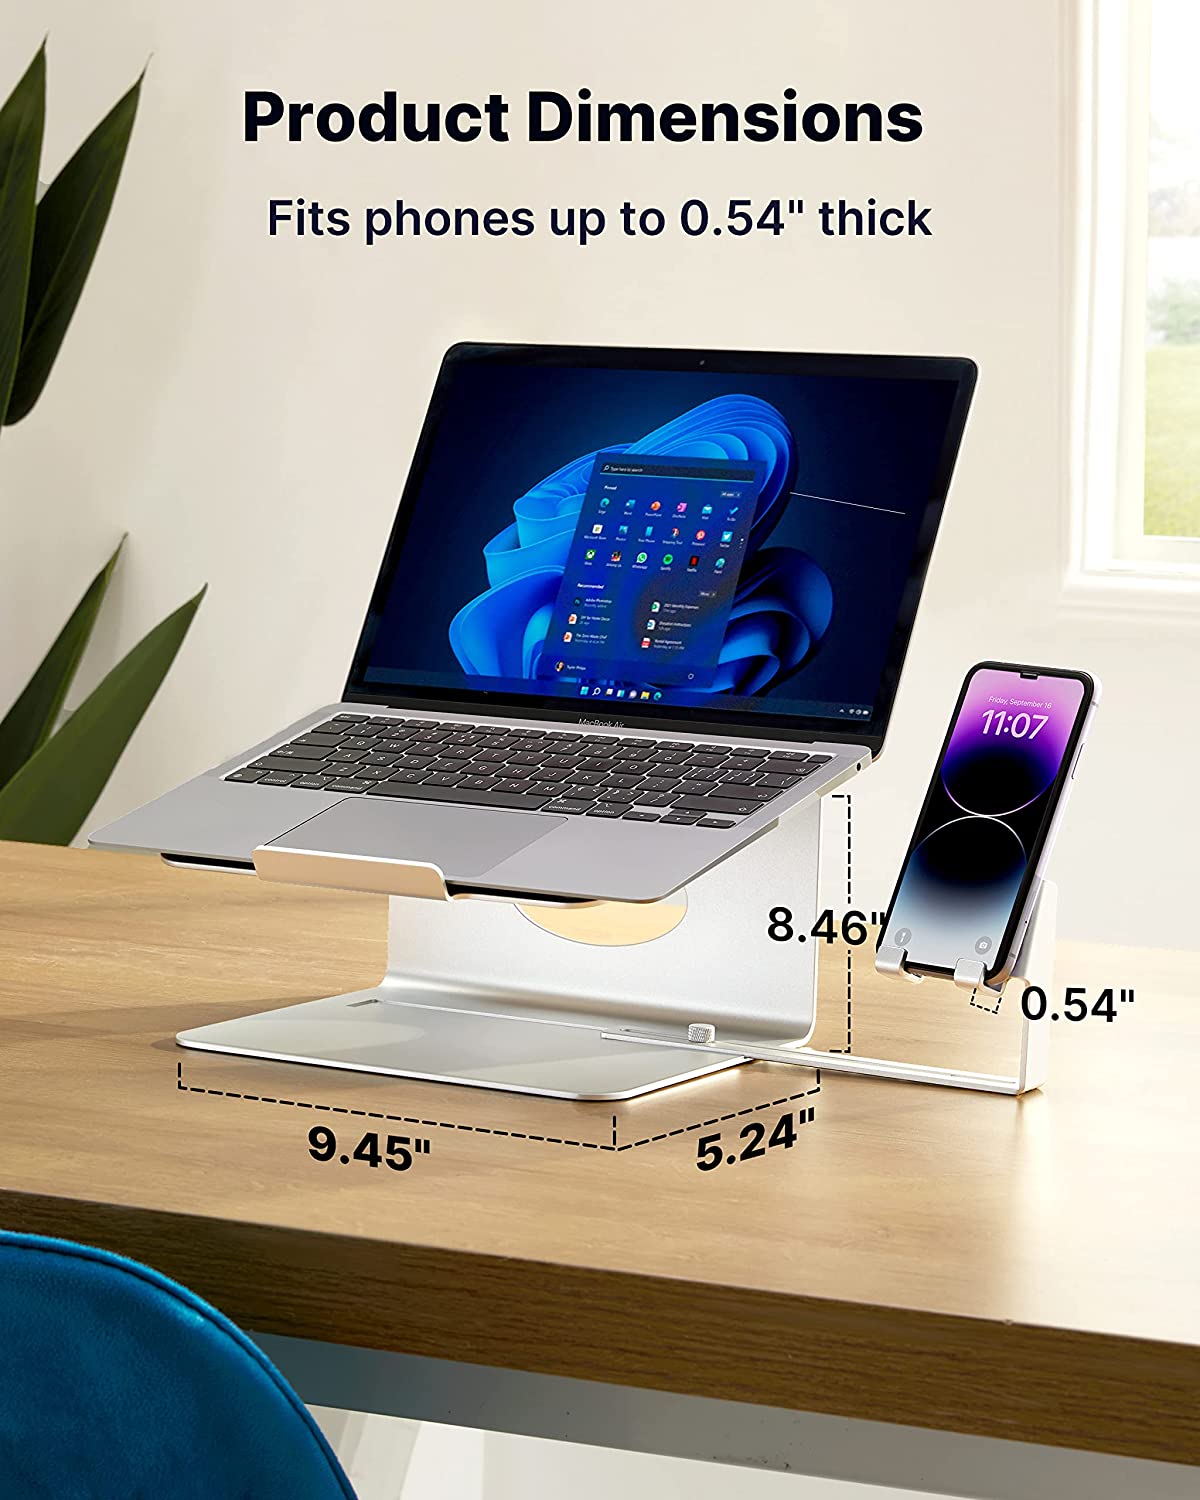 Product dimensions for a laptop stand with phone holder. It measures, 9.45 inches in length, 5.24 inches in depth and 8.46 inches in height.